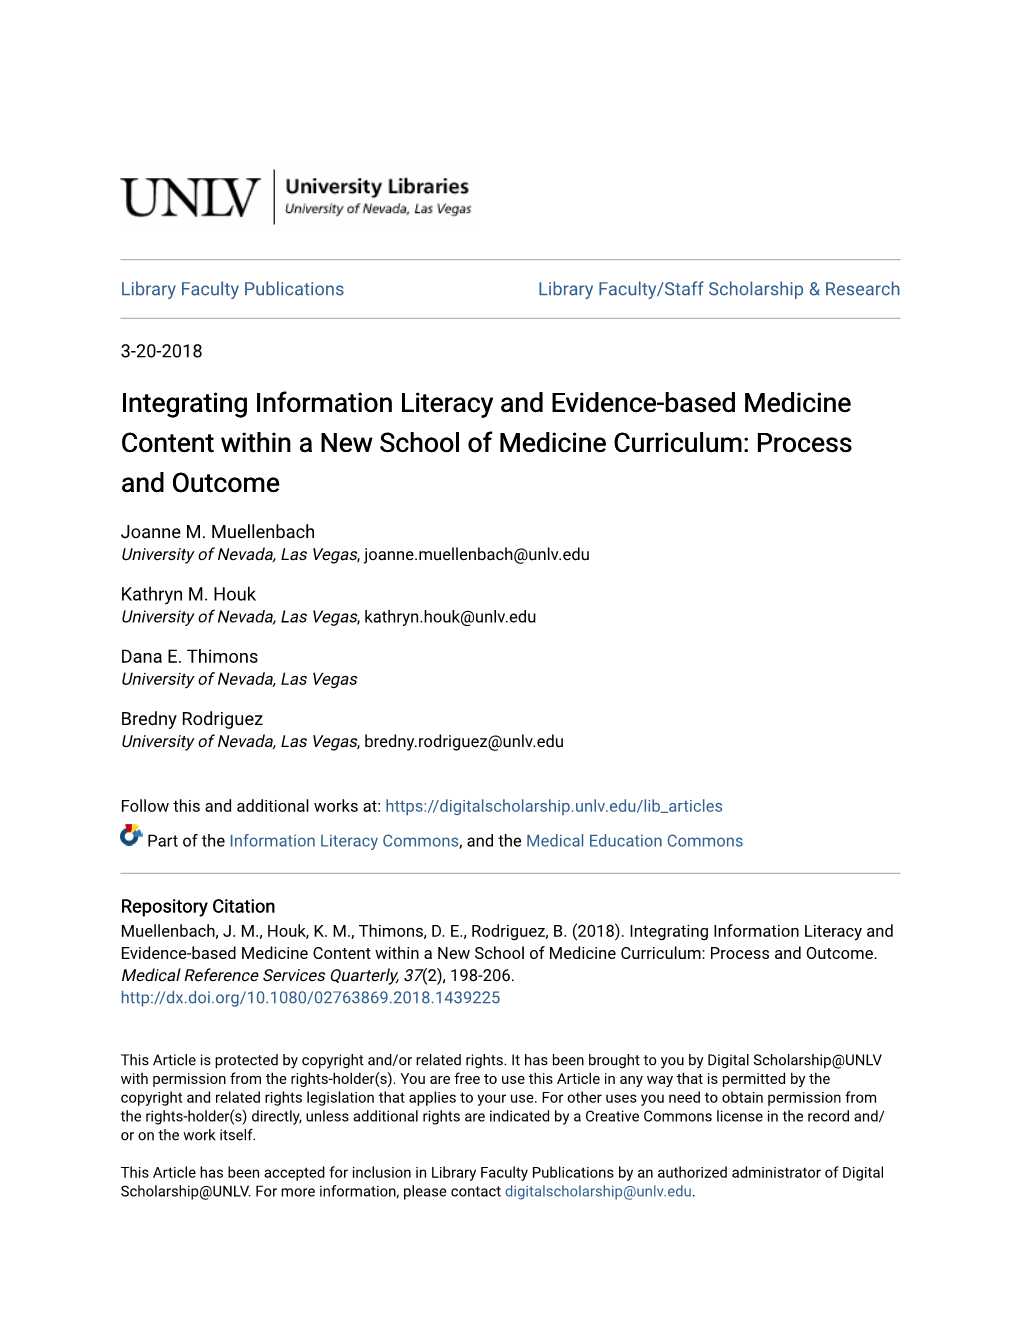 Integrating Information Literacy and Evidence-Based Medicine Content Within a New School of Medicine Curriculum: Process and Outcome